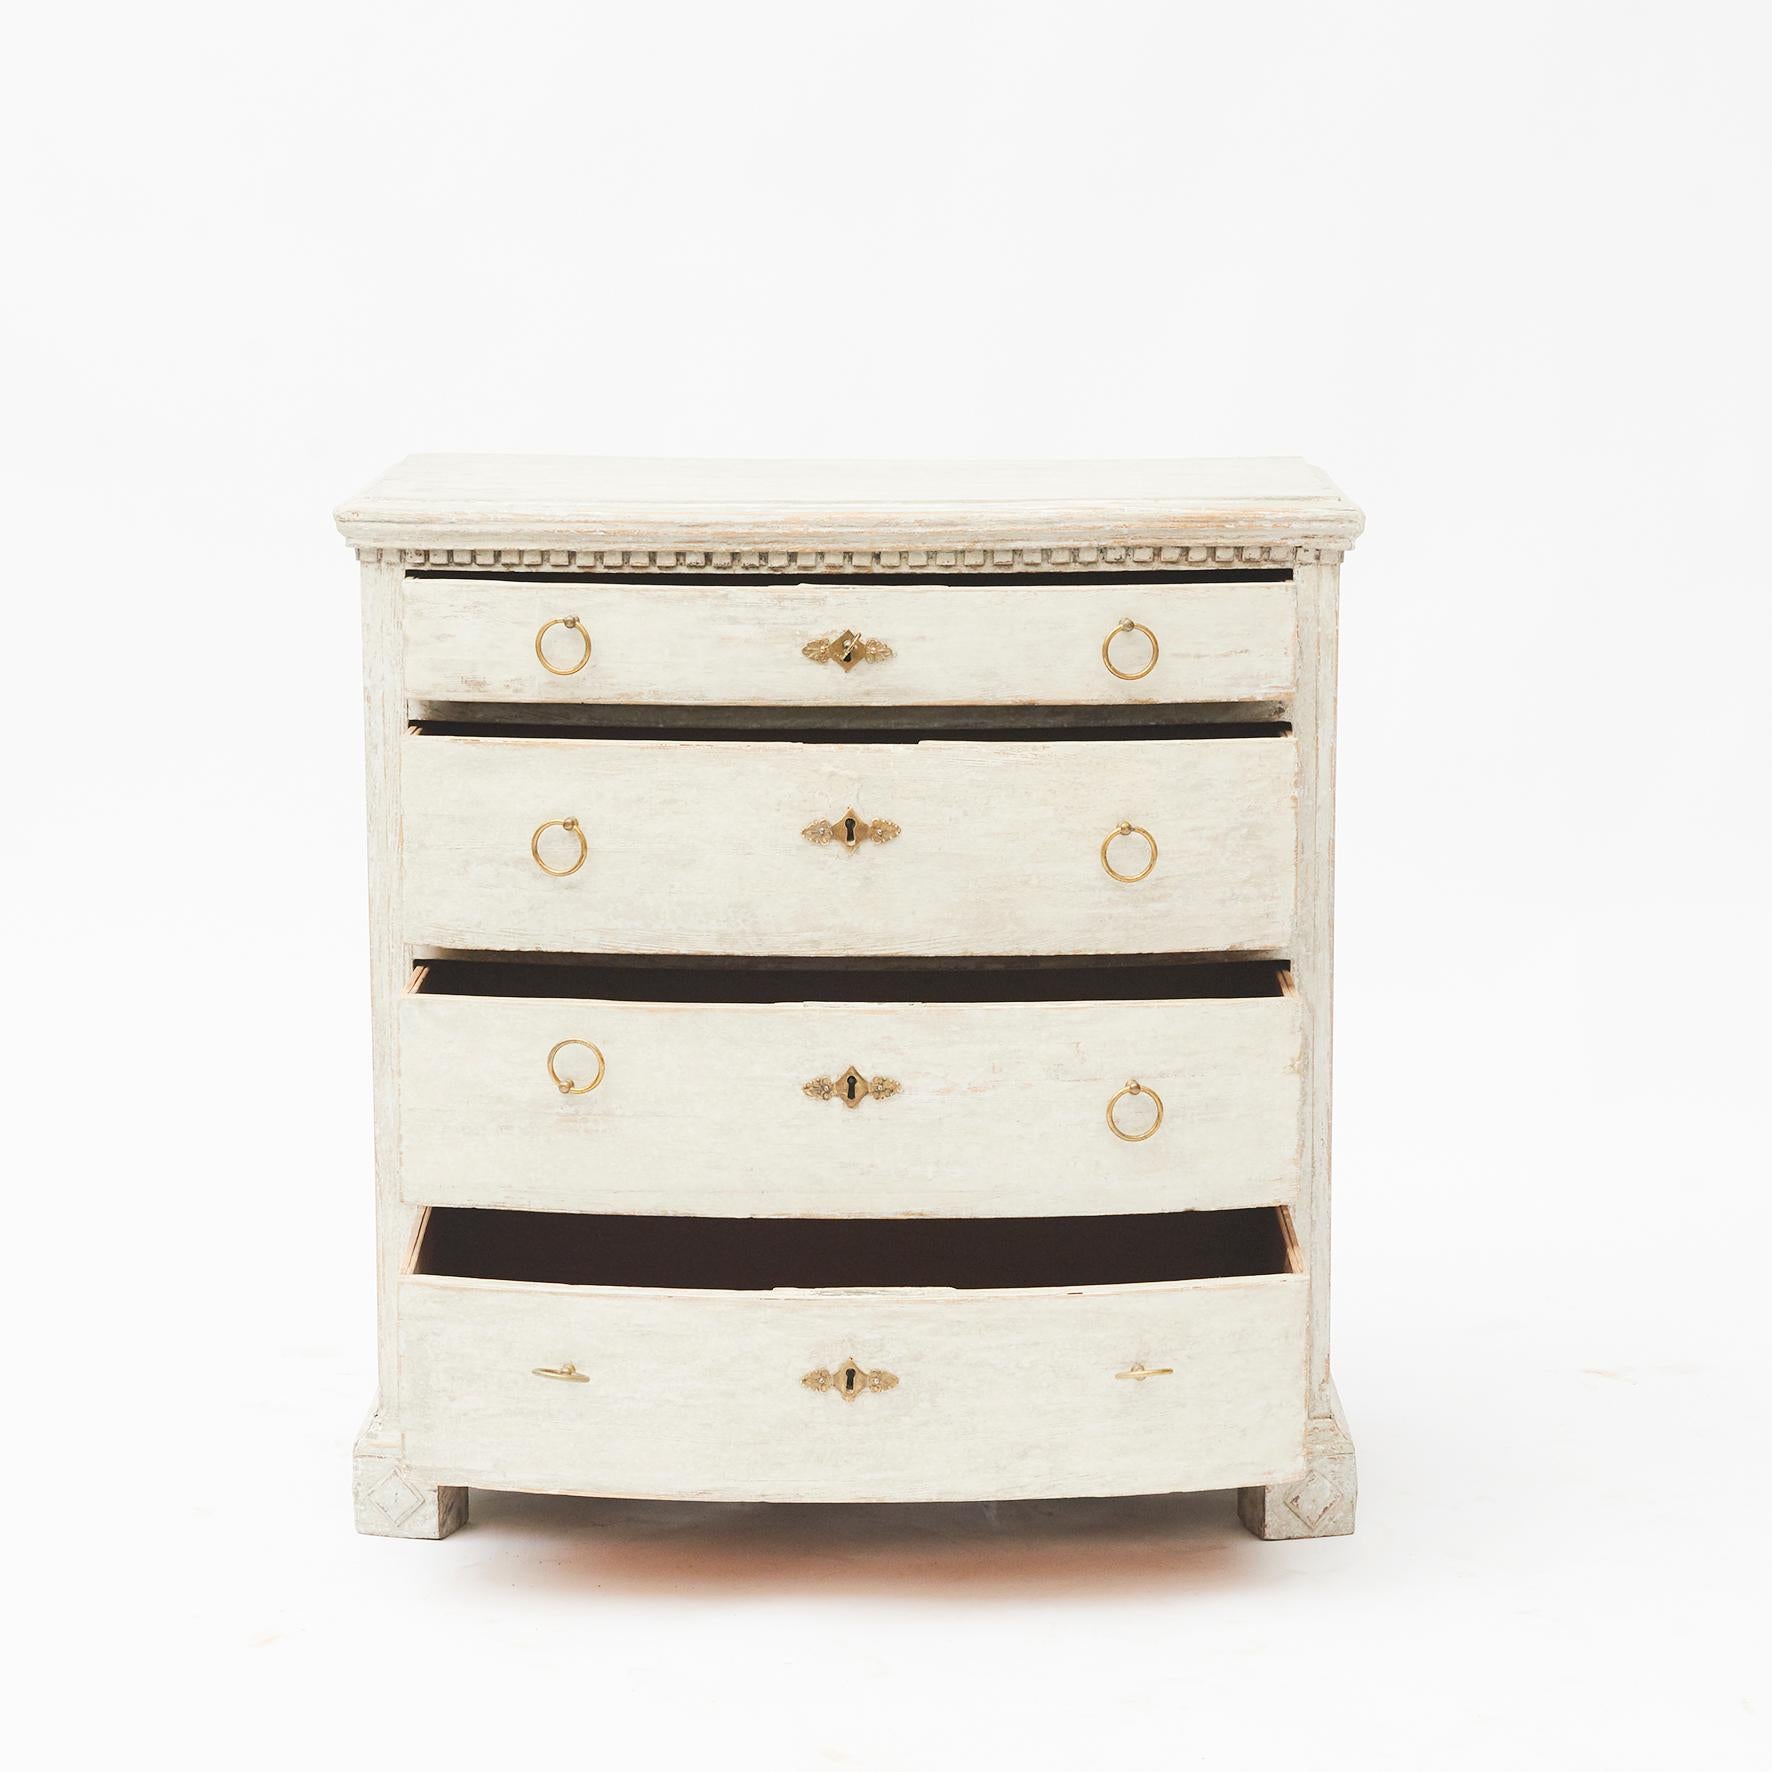 Danish Empire chest of drawers.
Four drawers with bowed front, top with dental molding.
Resting on legs adorned with diamond motifs. Light grey painted.
Denmark, circa 1810.